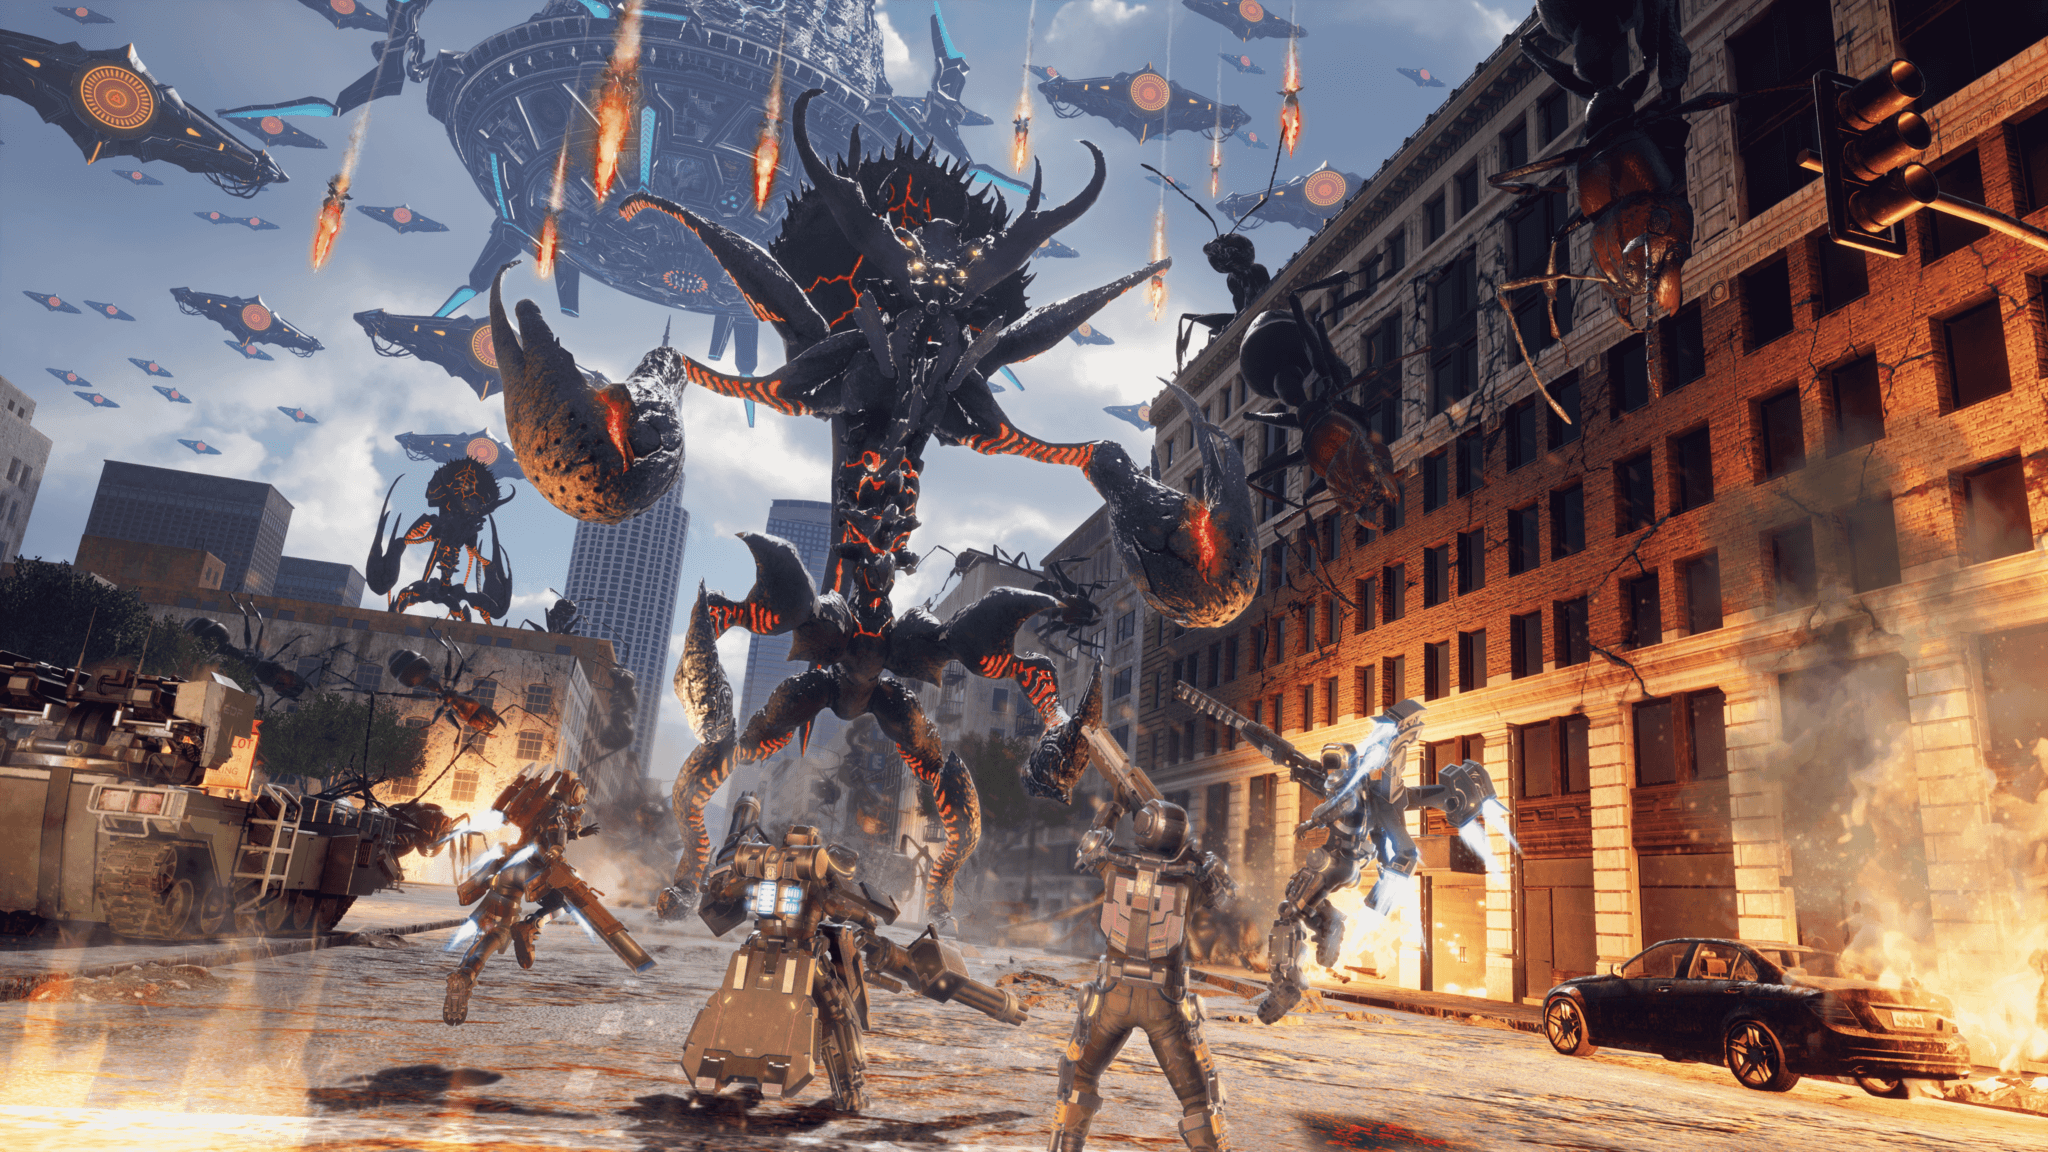 Earth Defense Force: Iron Rain Interview With Producer Nobuyuki